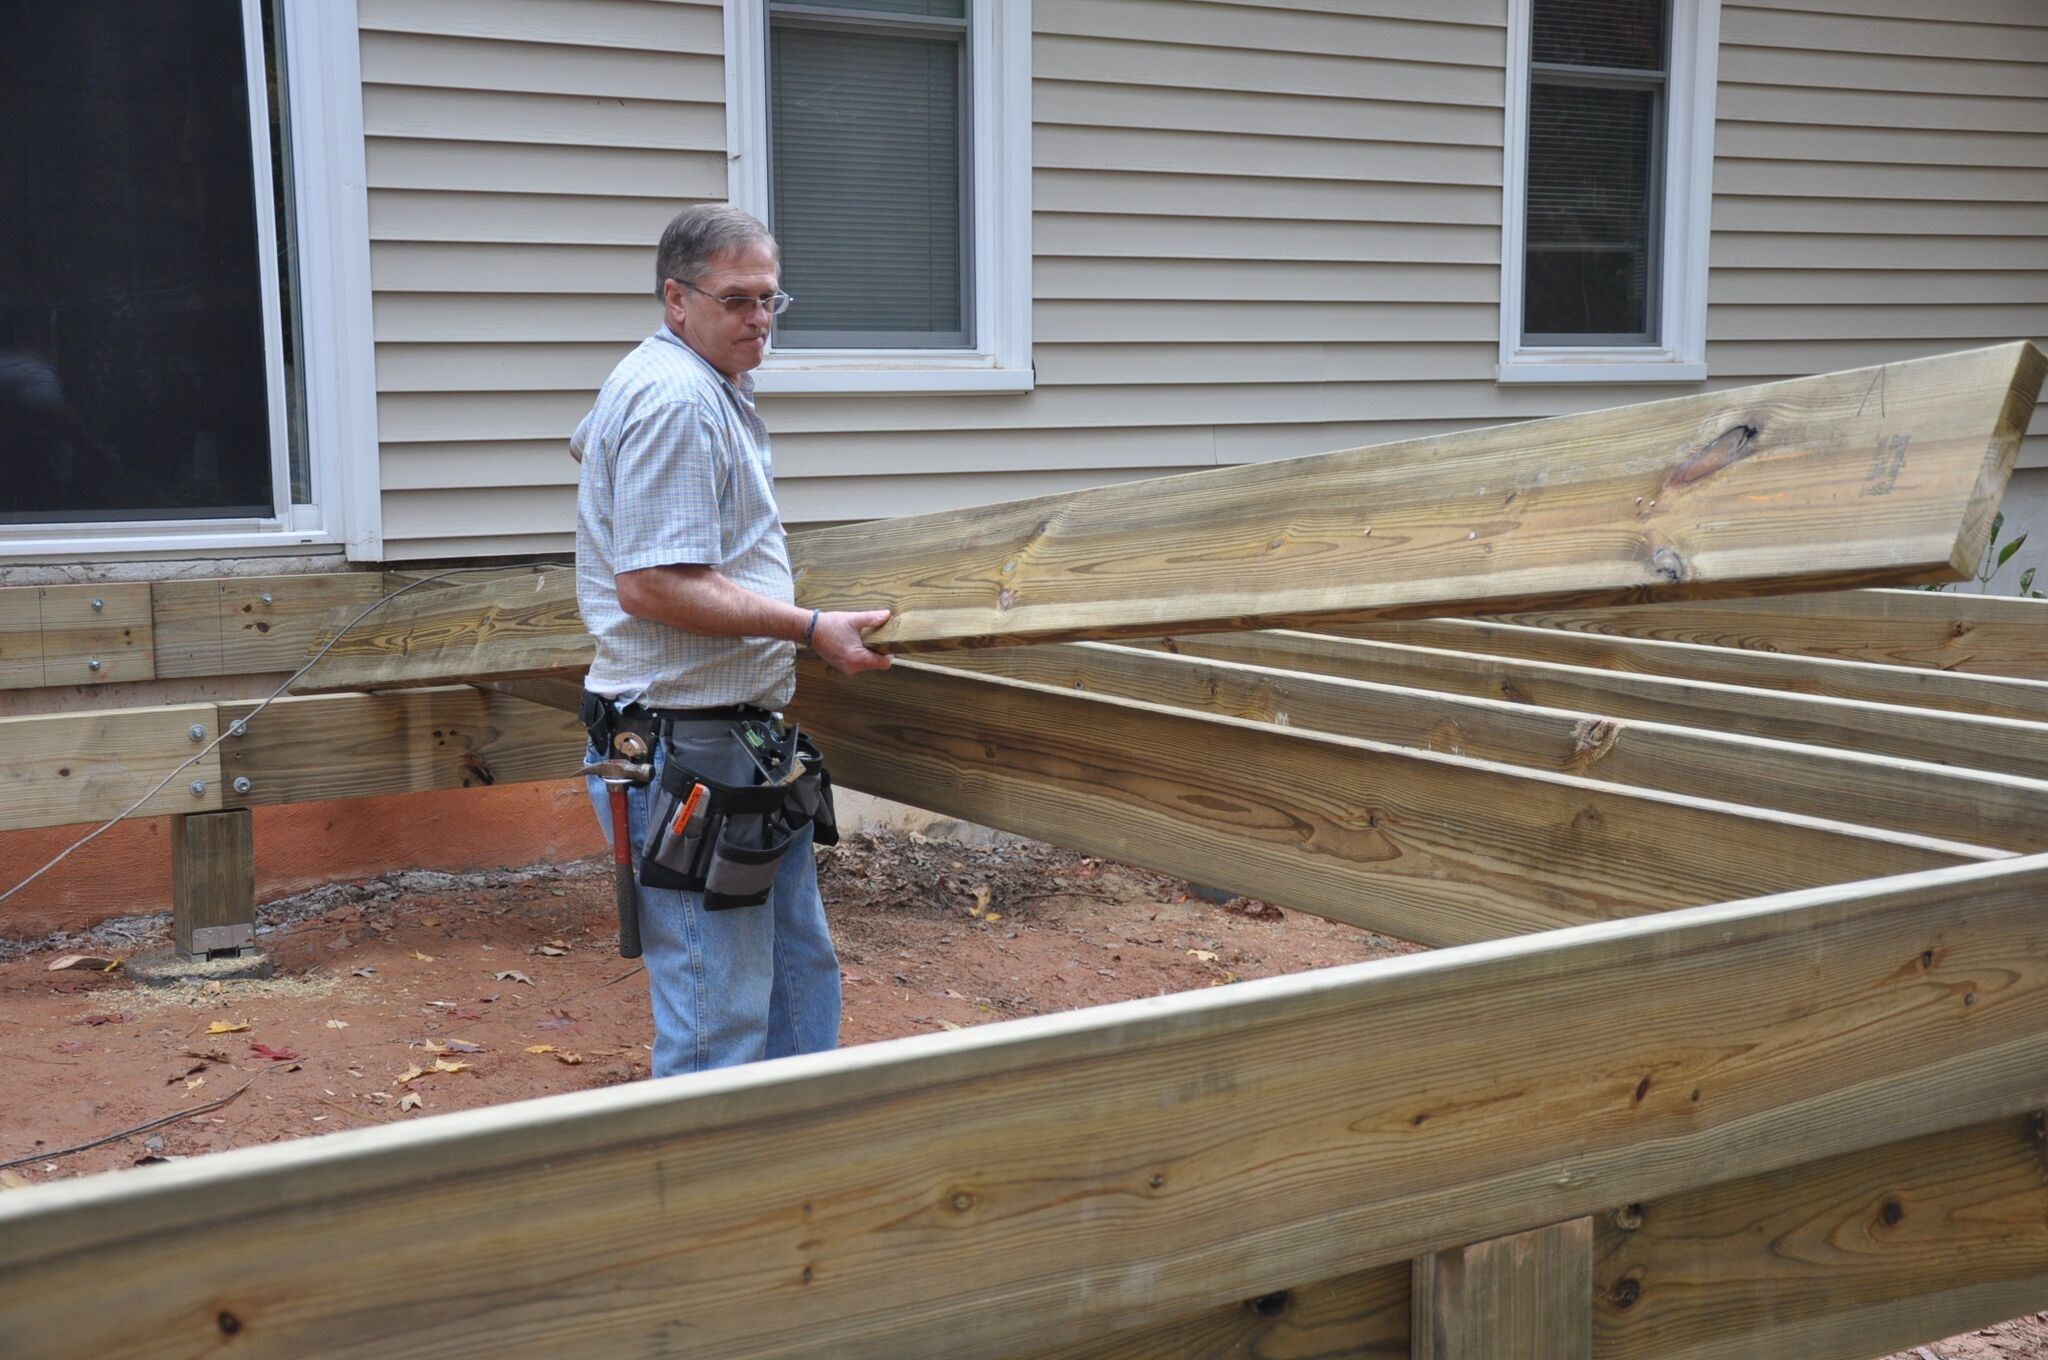 Deck Joist Sizing And Spacing Decks in sizing 2048 X 1360